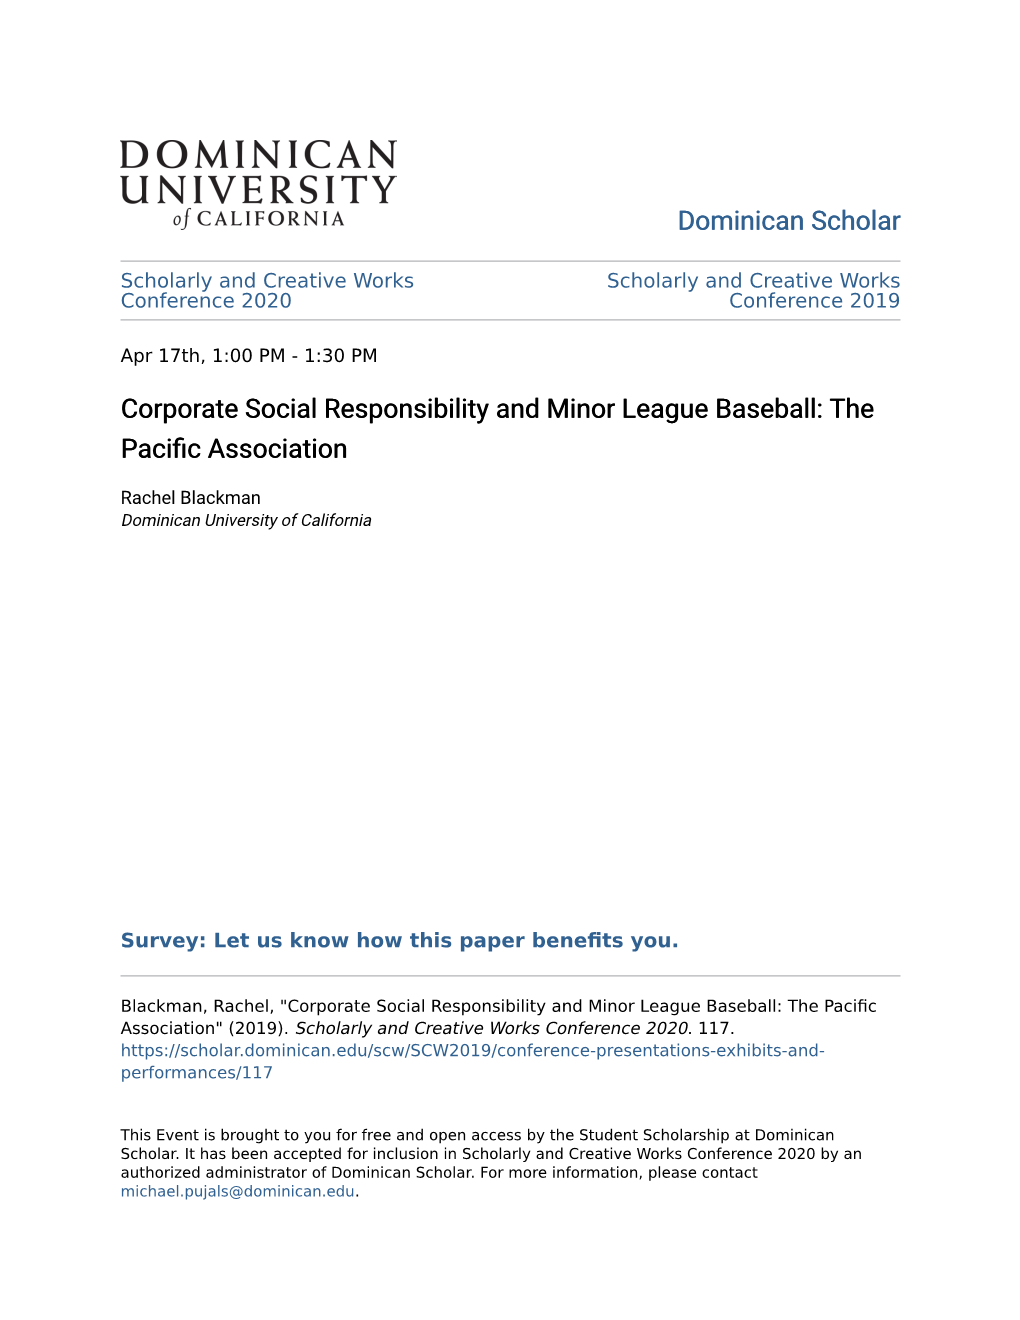 Corporate Social Responsibility and Minor League Baseball: the Pacific Association